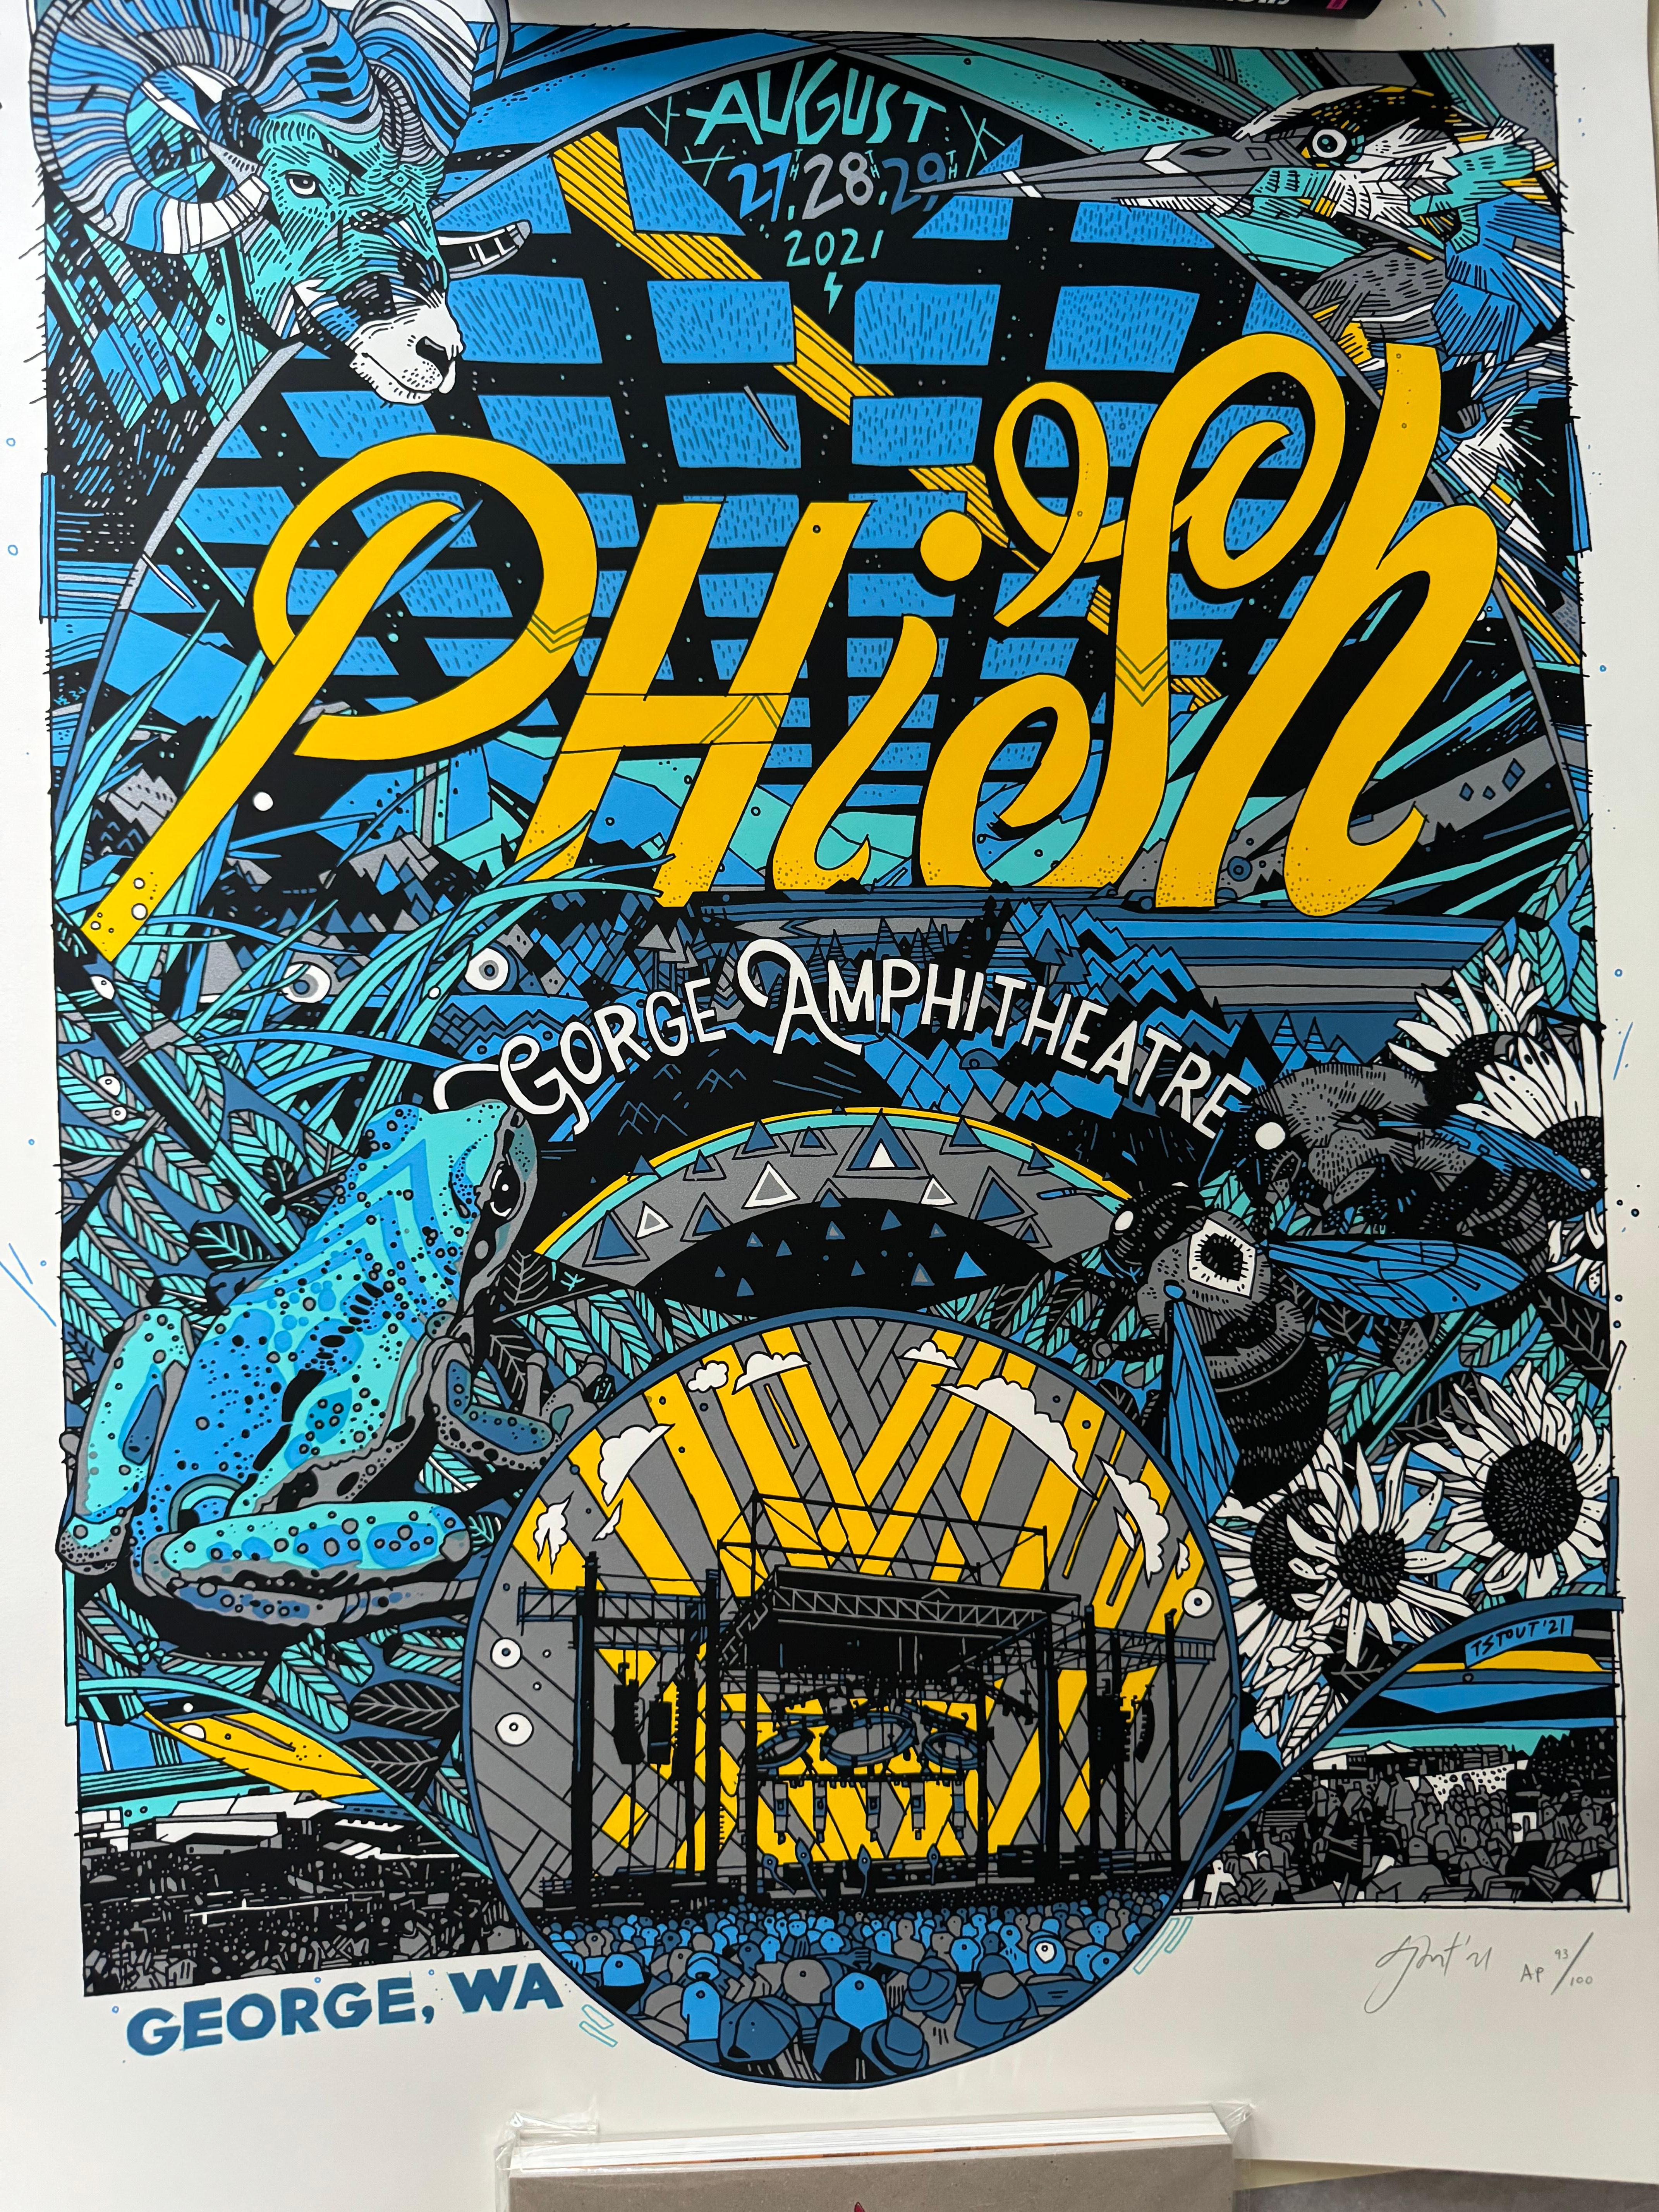 In the heart of the Pacific Northwest, where the Columbia River winds its course through the stunning landscape, an extraordinary collaboration took place. The prolific artist Tyler Stout joined forces with the legendary band Phish for a performance